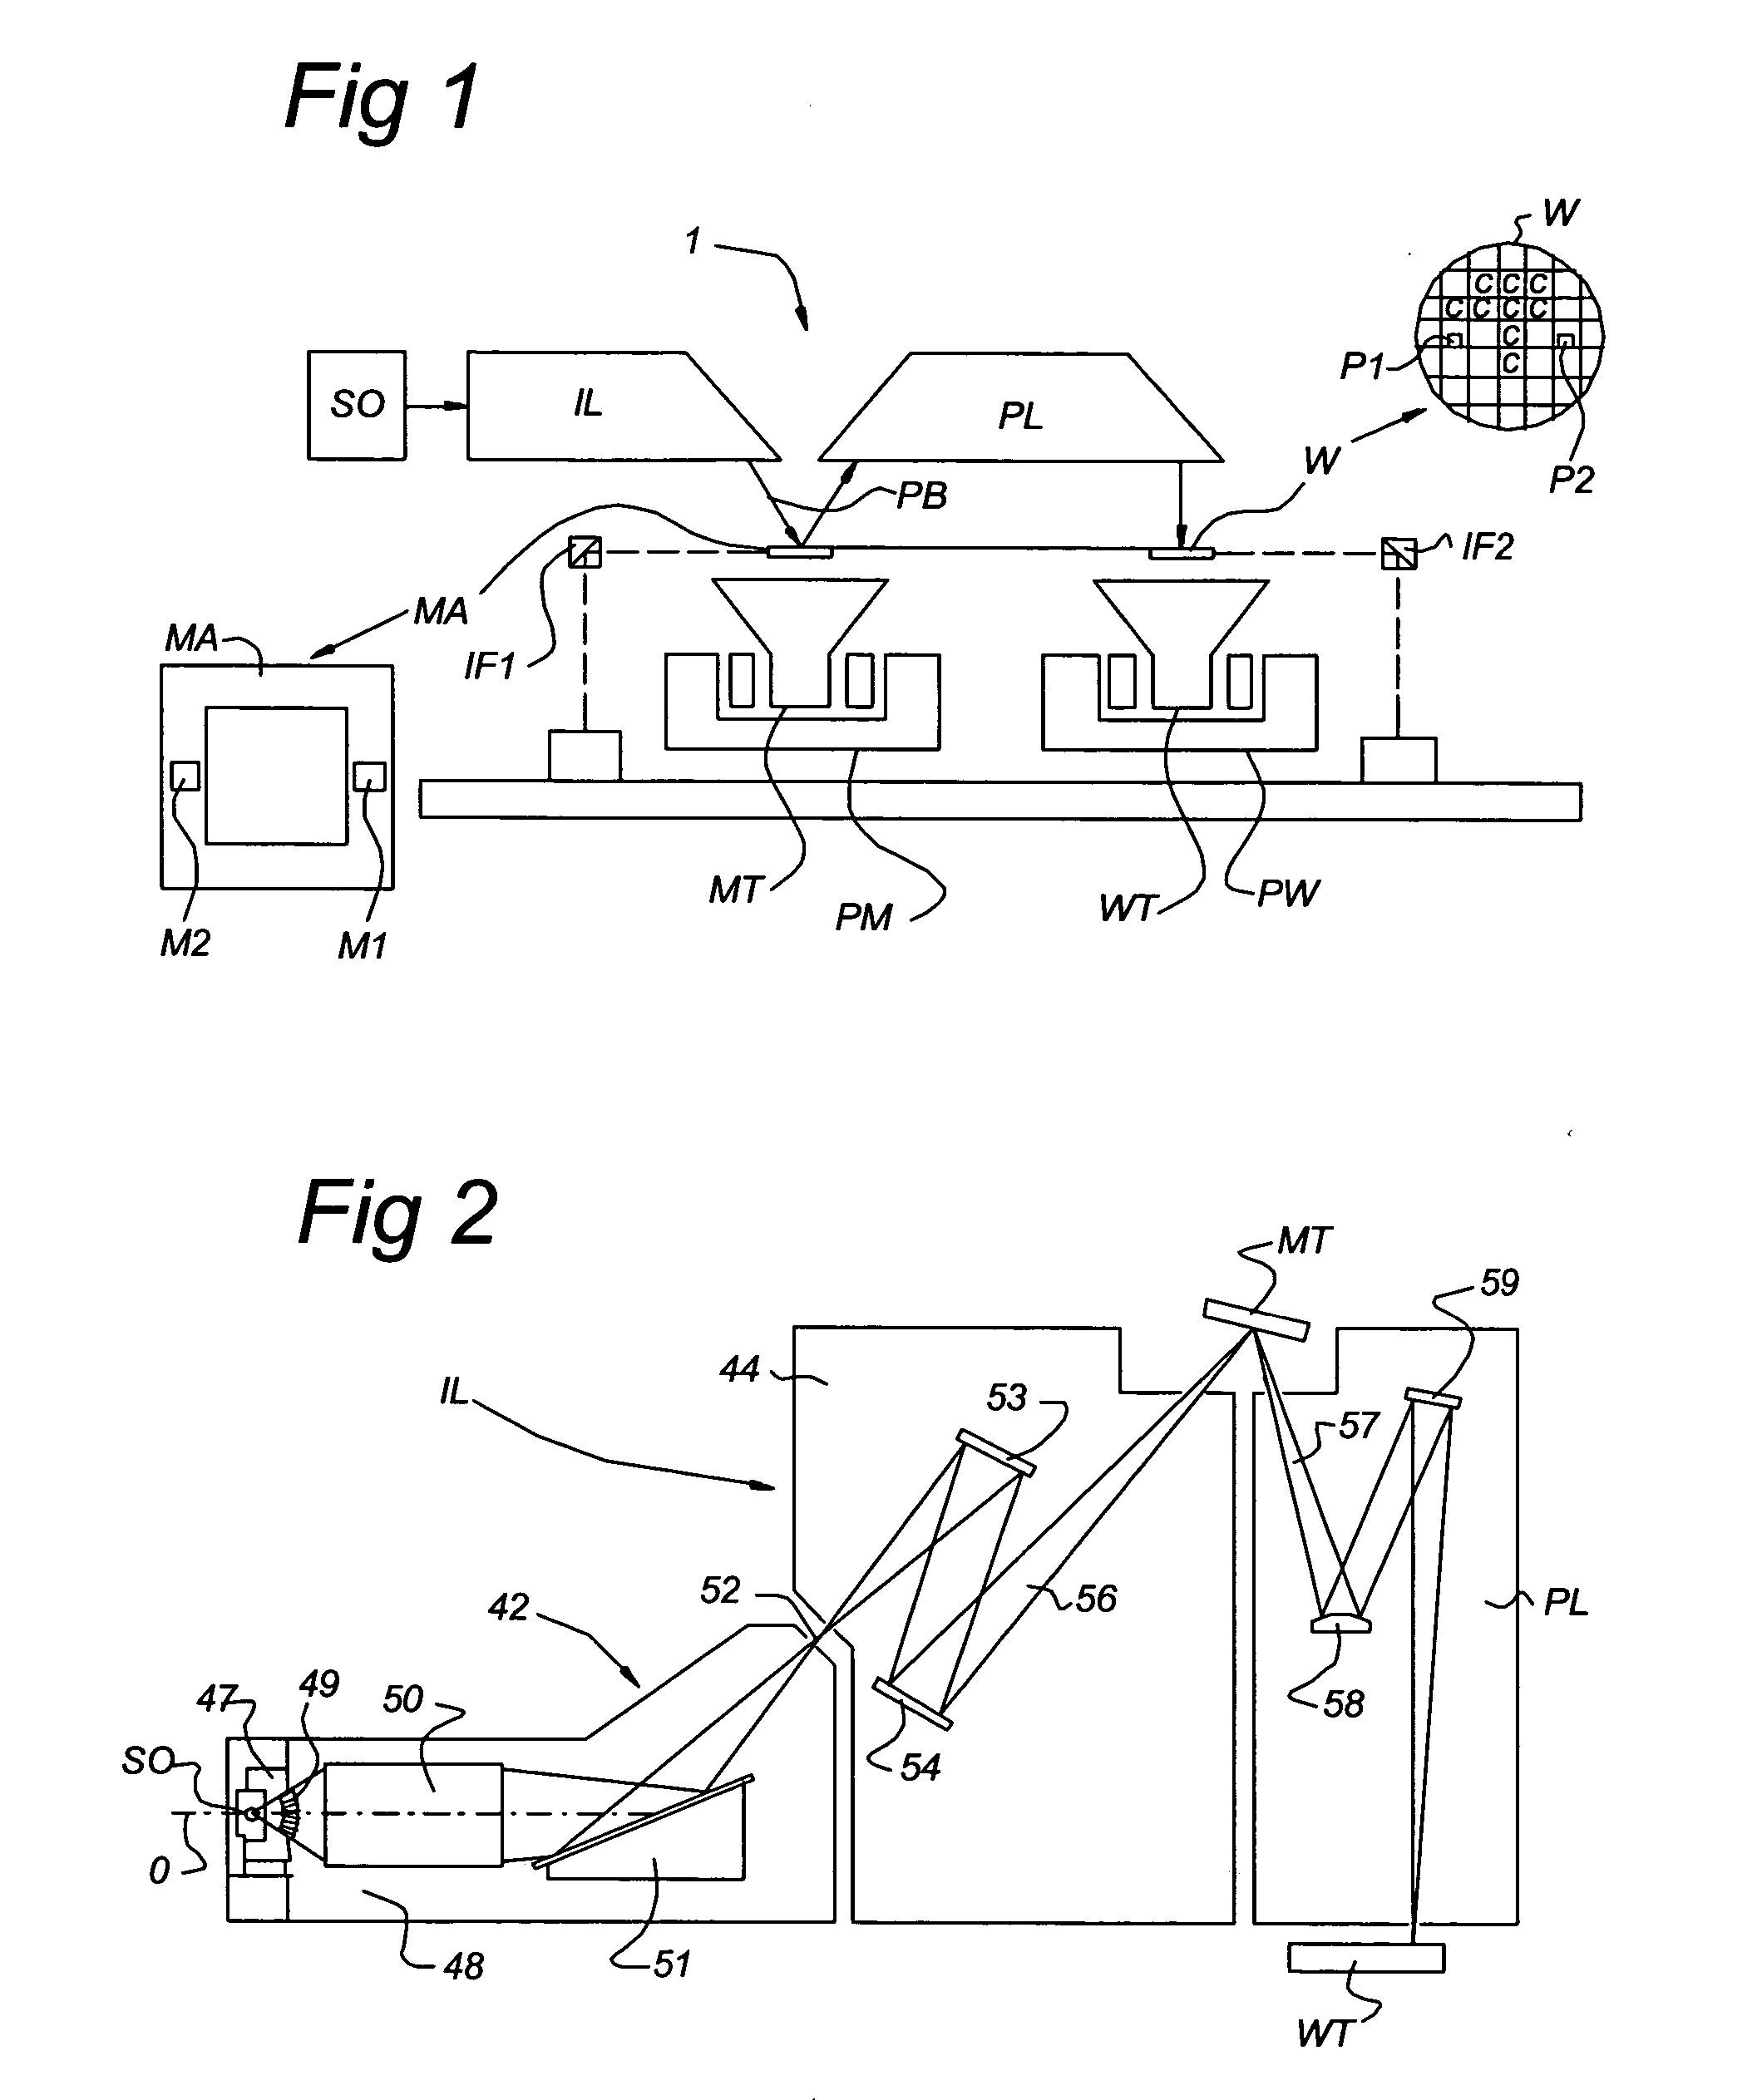 Method for the removal of deposition on an optical element, method for the protection of an optical element, device manufacturing method, apparatus including an optical element, and lithographic apparatus